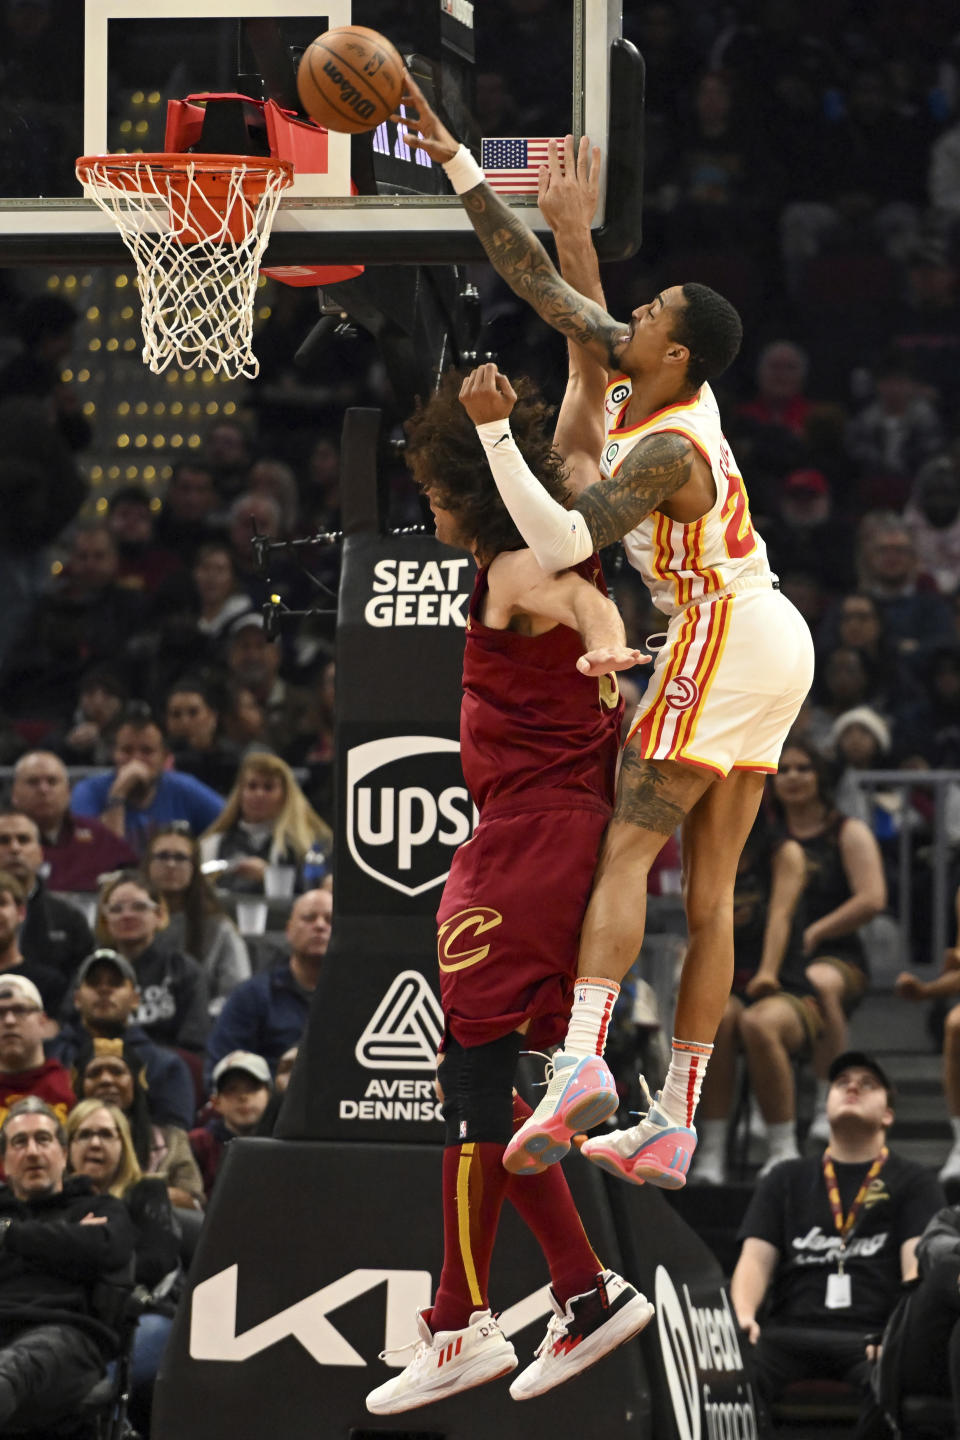 Atlanta Hawks forward John Collins attempts a dunk over Cleveland Cavaliers center Robin Lopez during the first half of an NBA basketball game, Monday, Nov. 21, 2022, in Cleveland. (AP Photo/Nick Cammett)